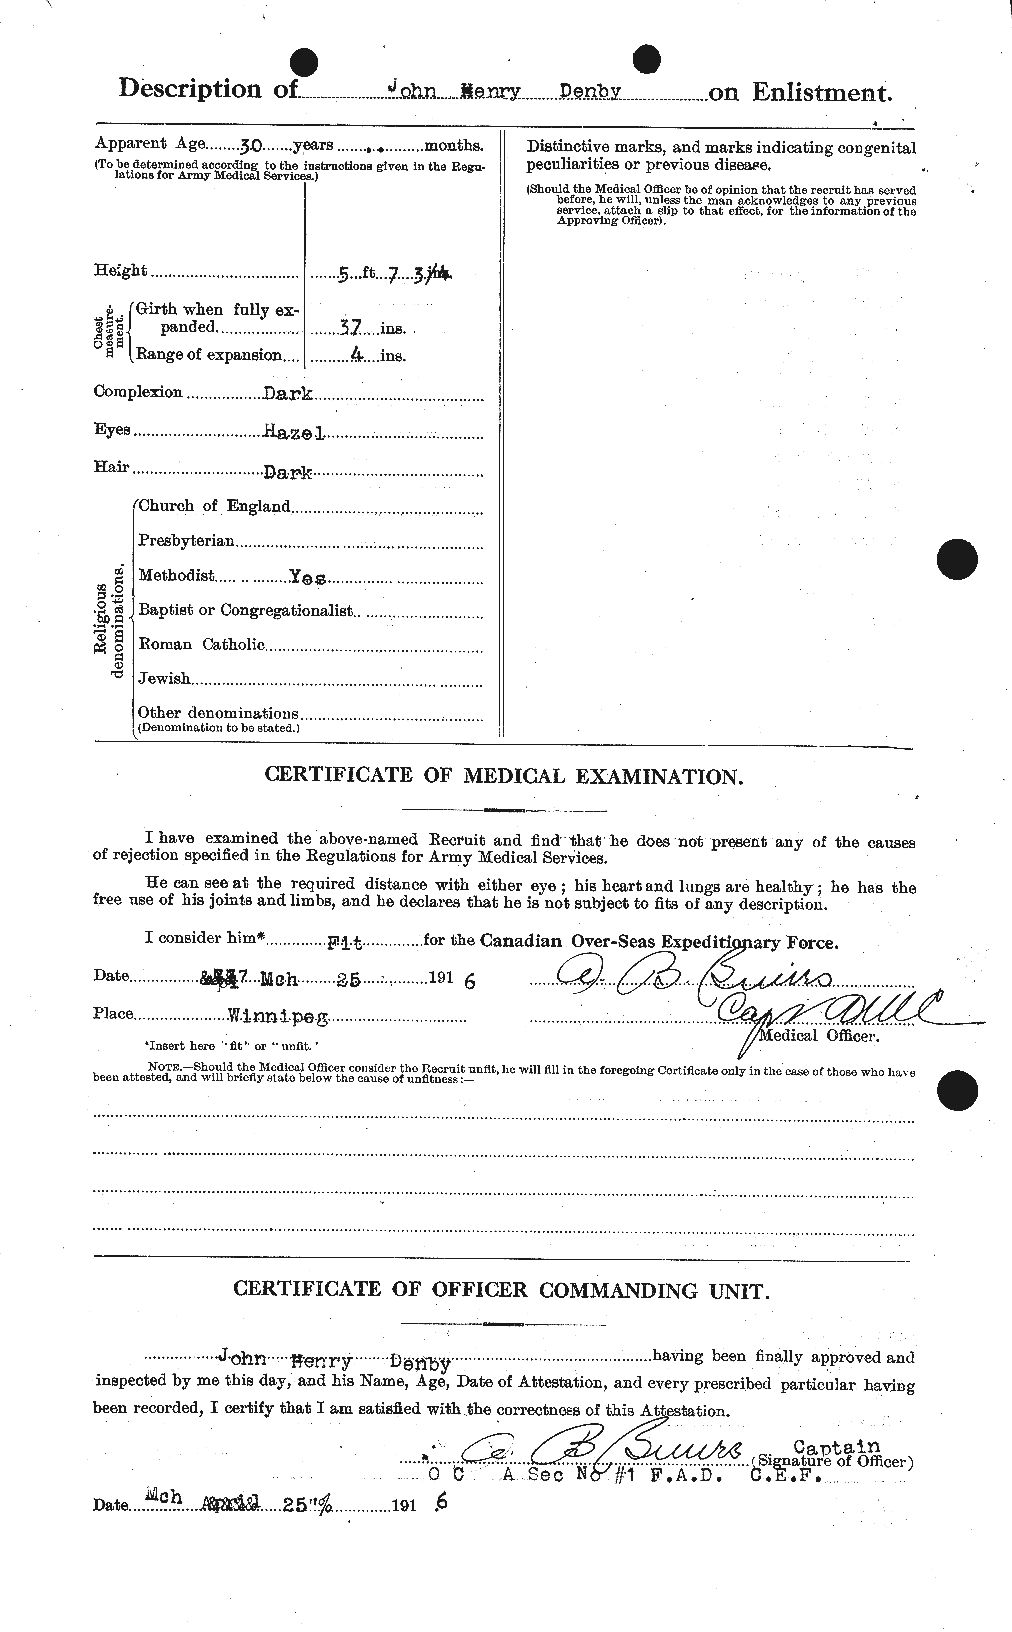 Personnel Records of the First World War - CEF 287846b